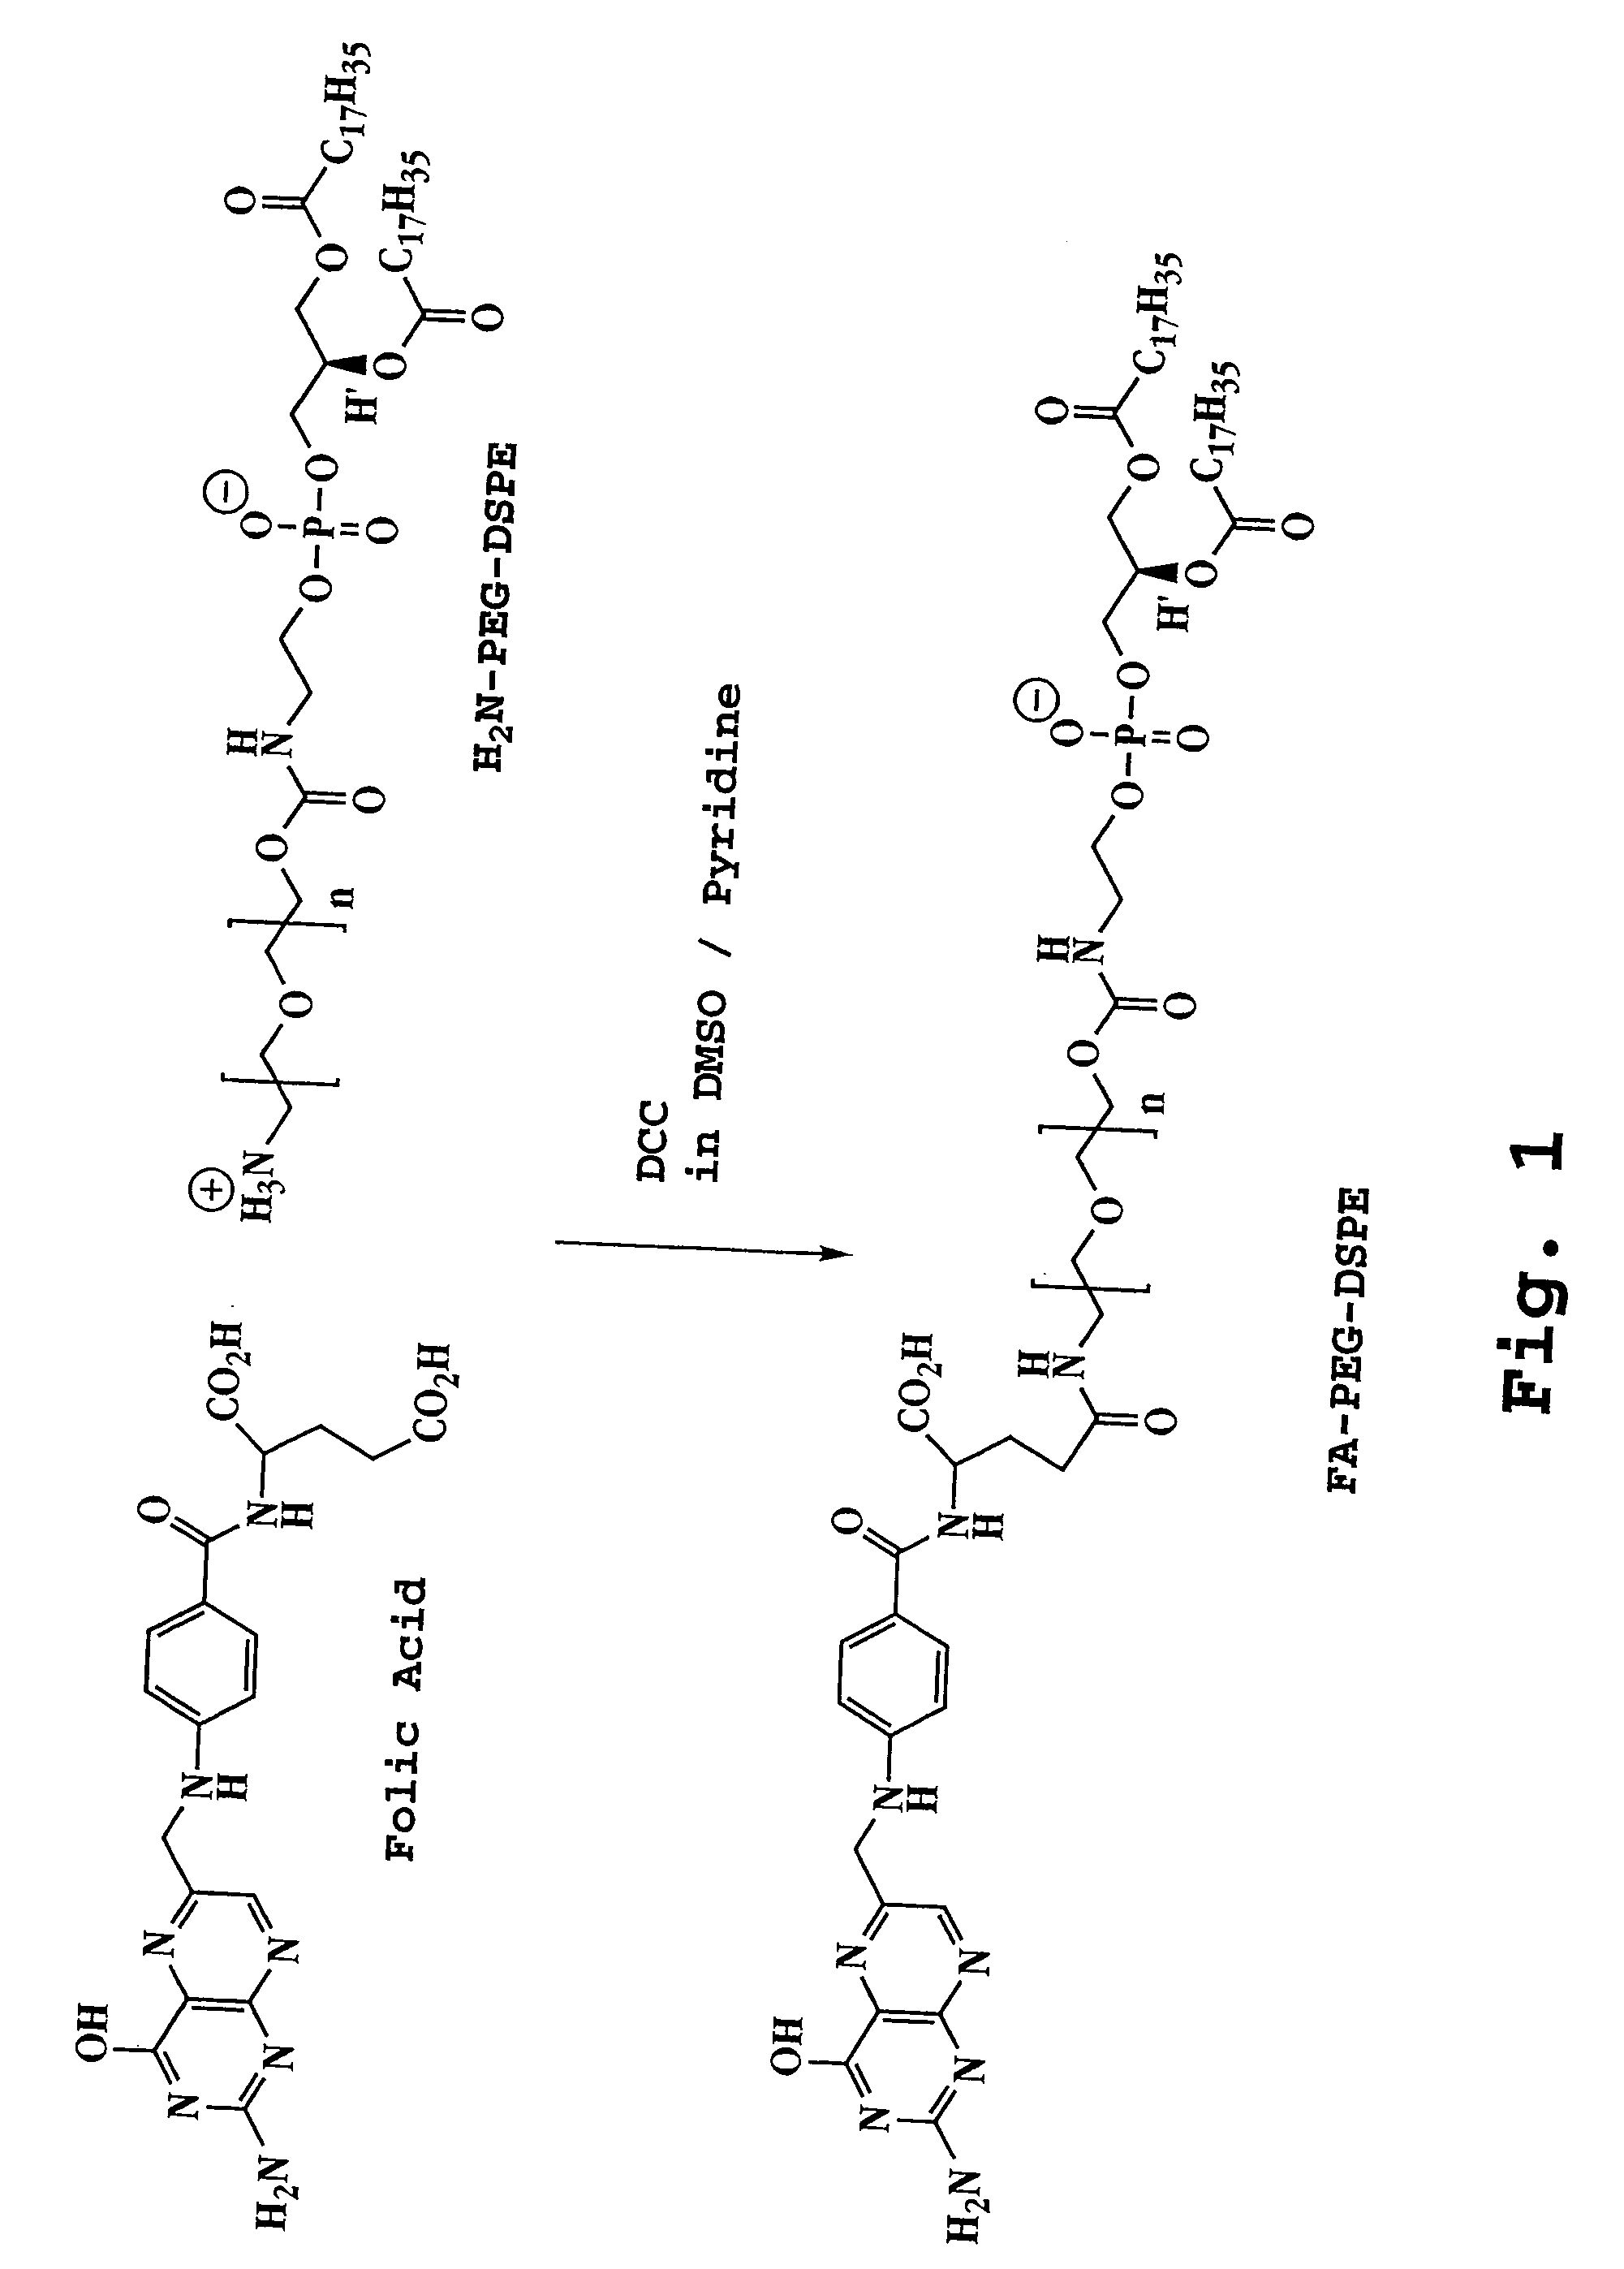 Method of administering a compound to multi-drug resistant cells